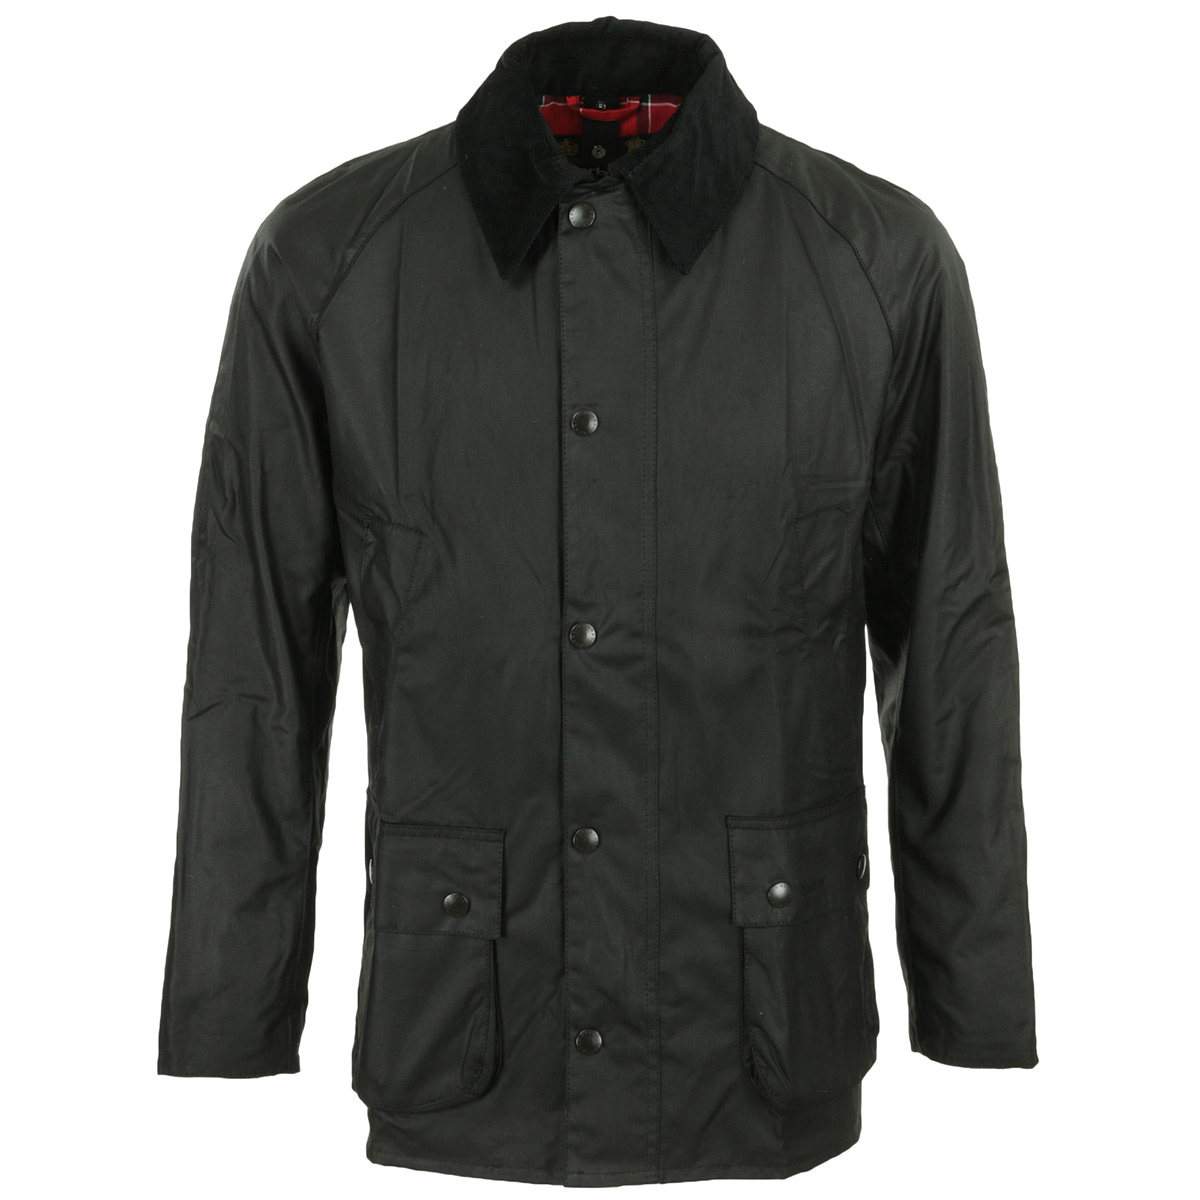 Barbour "Ashby Wax Jacket"